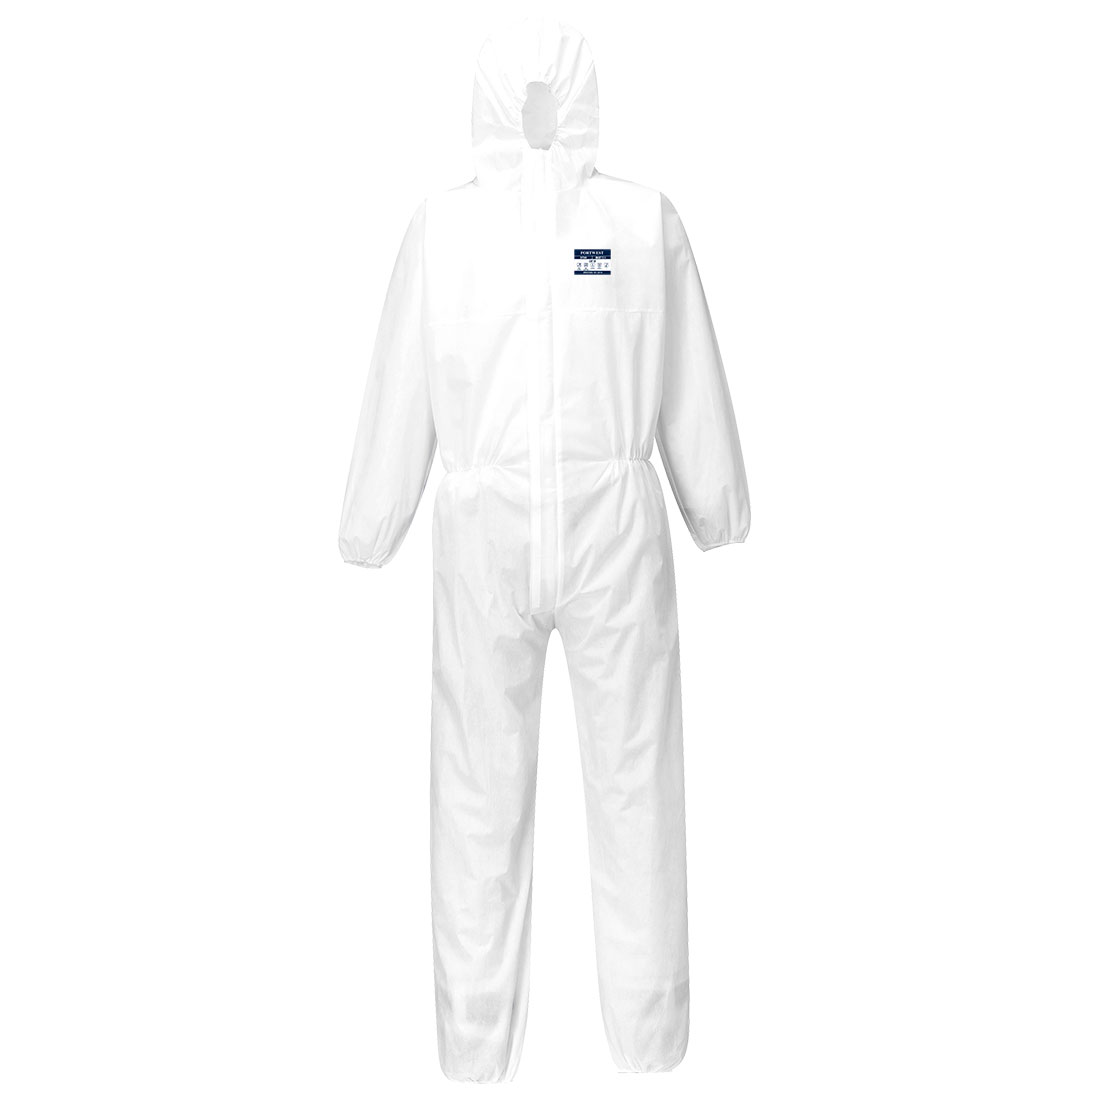 BizTex SMS Coverall Type 5/6